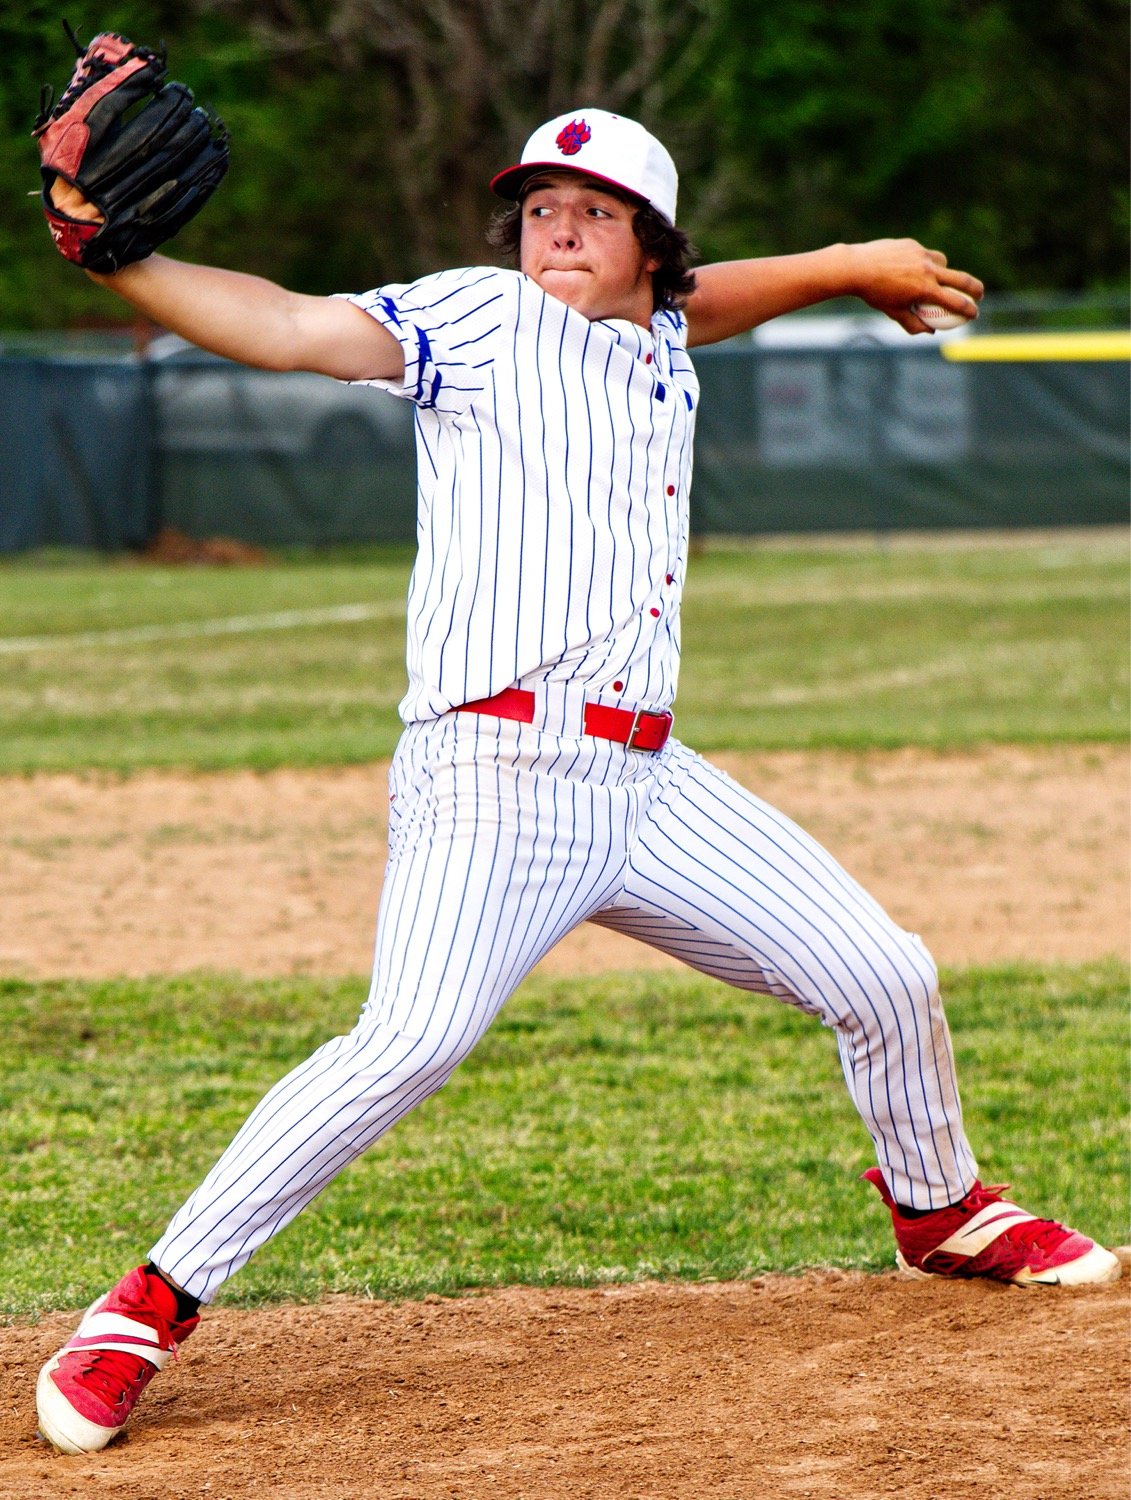 Chaelton Cook delivers a pitch in his winning effort against North Hopkins. [see more hits]